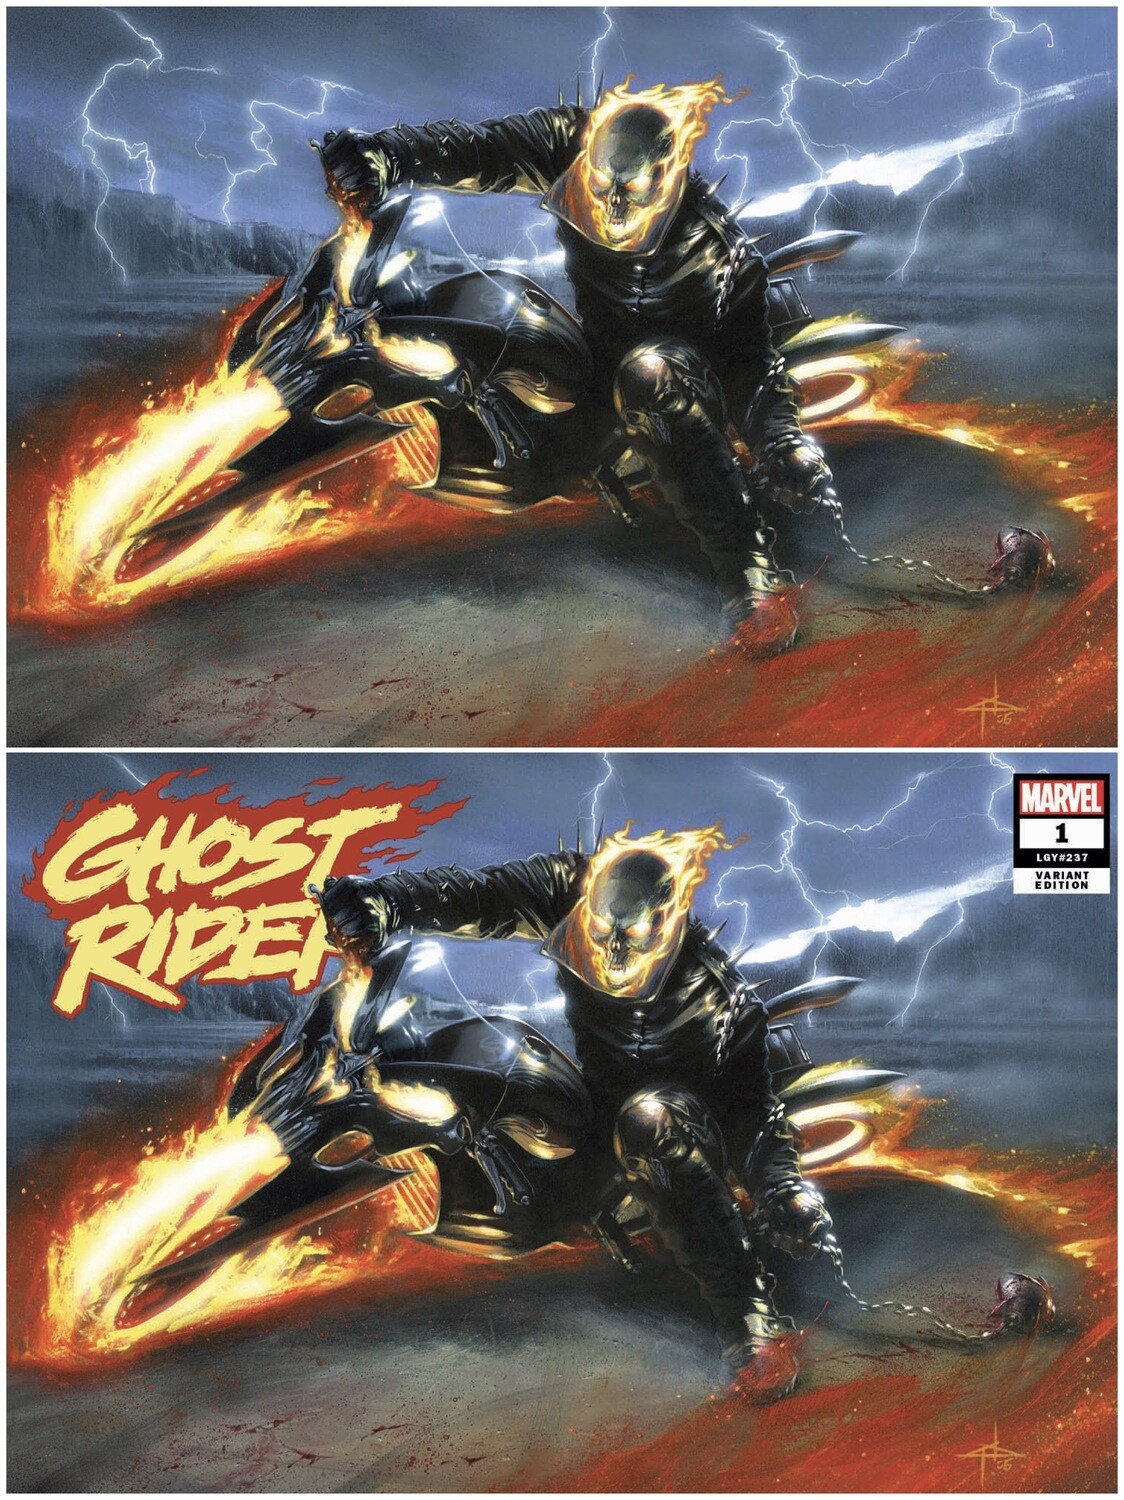 Ghost Rider #1 Gabriele Dell'Otto 2-pack Exclusive Variant Set TRADE DRESS/VIRGIN [PREORDER]